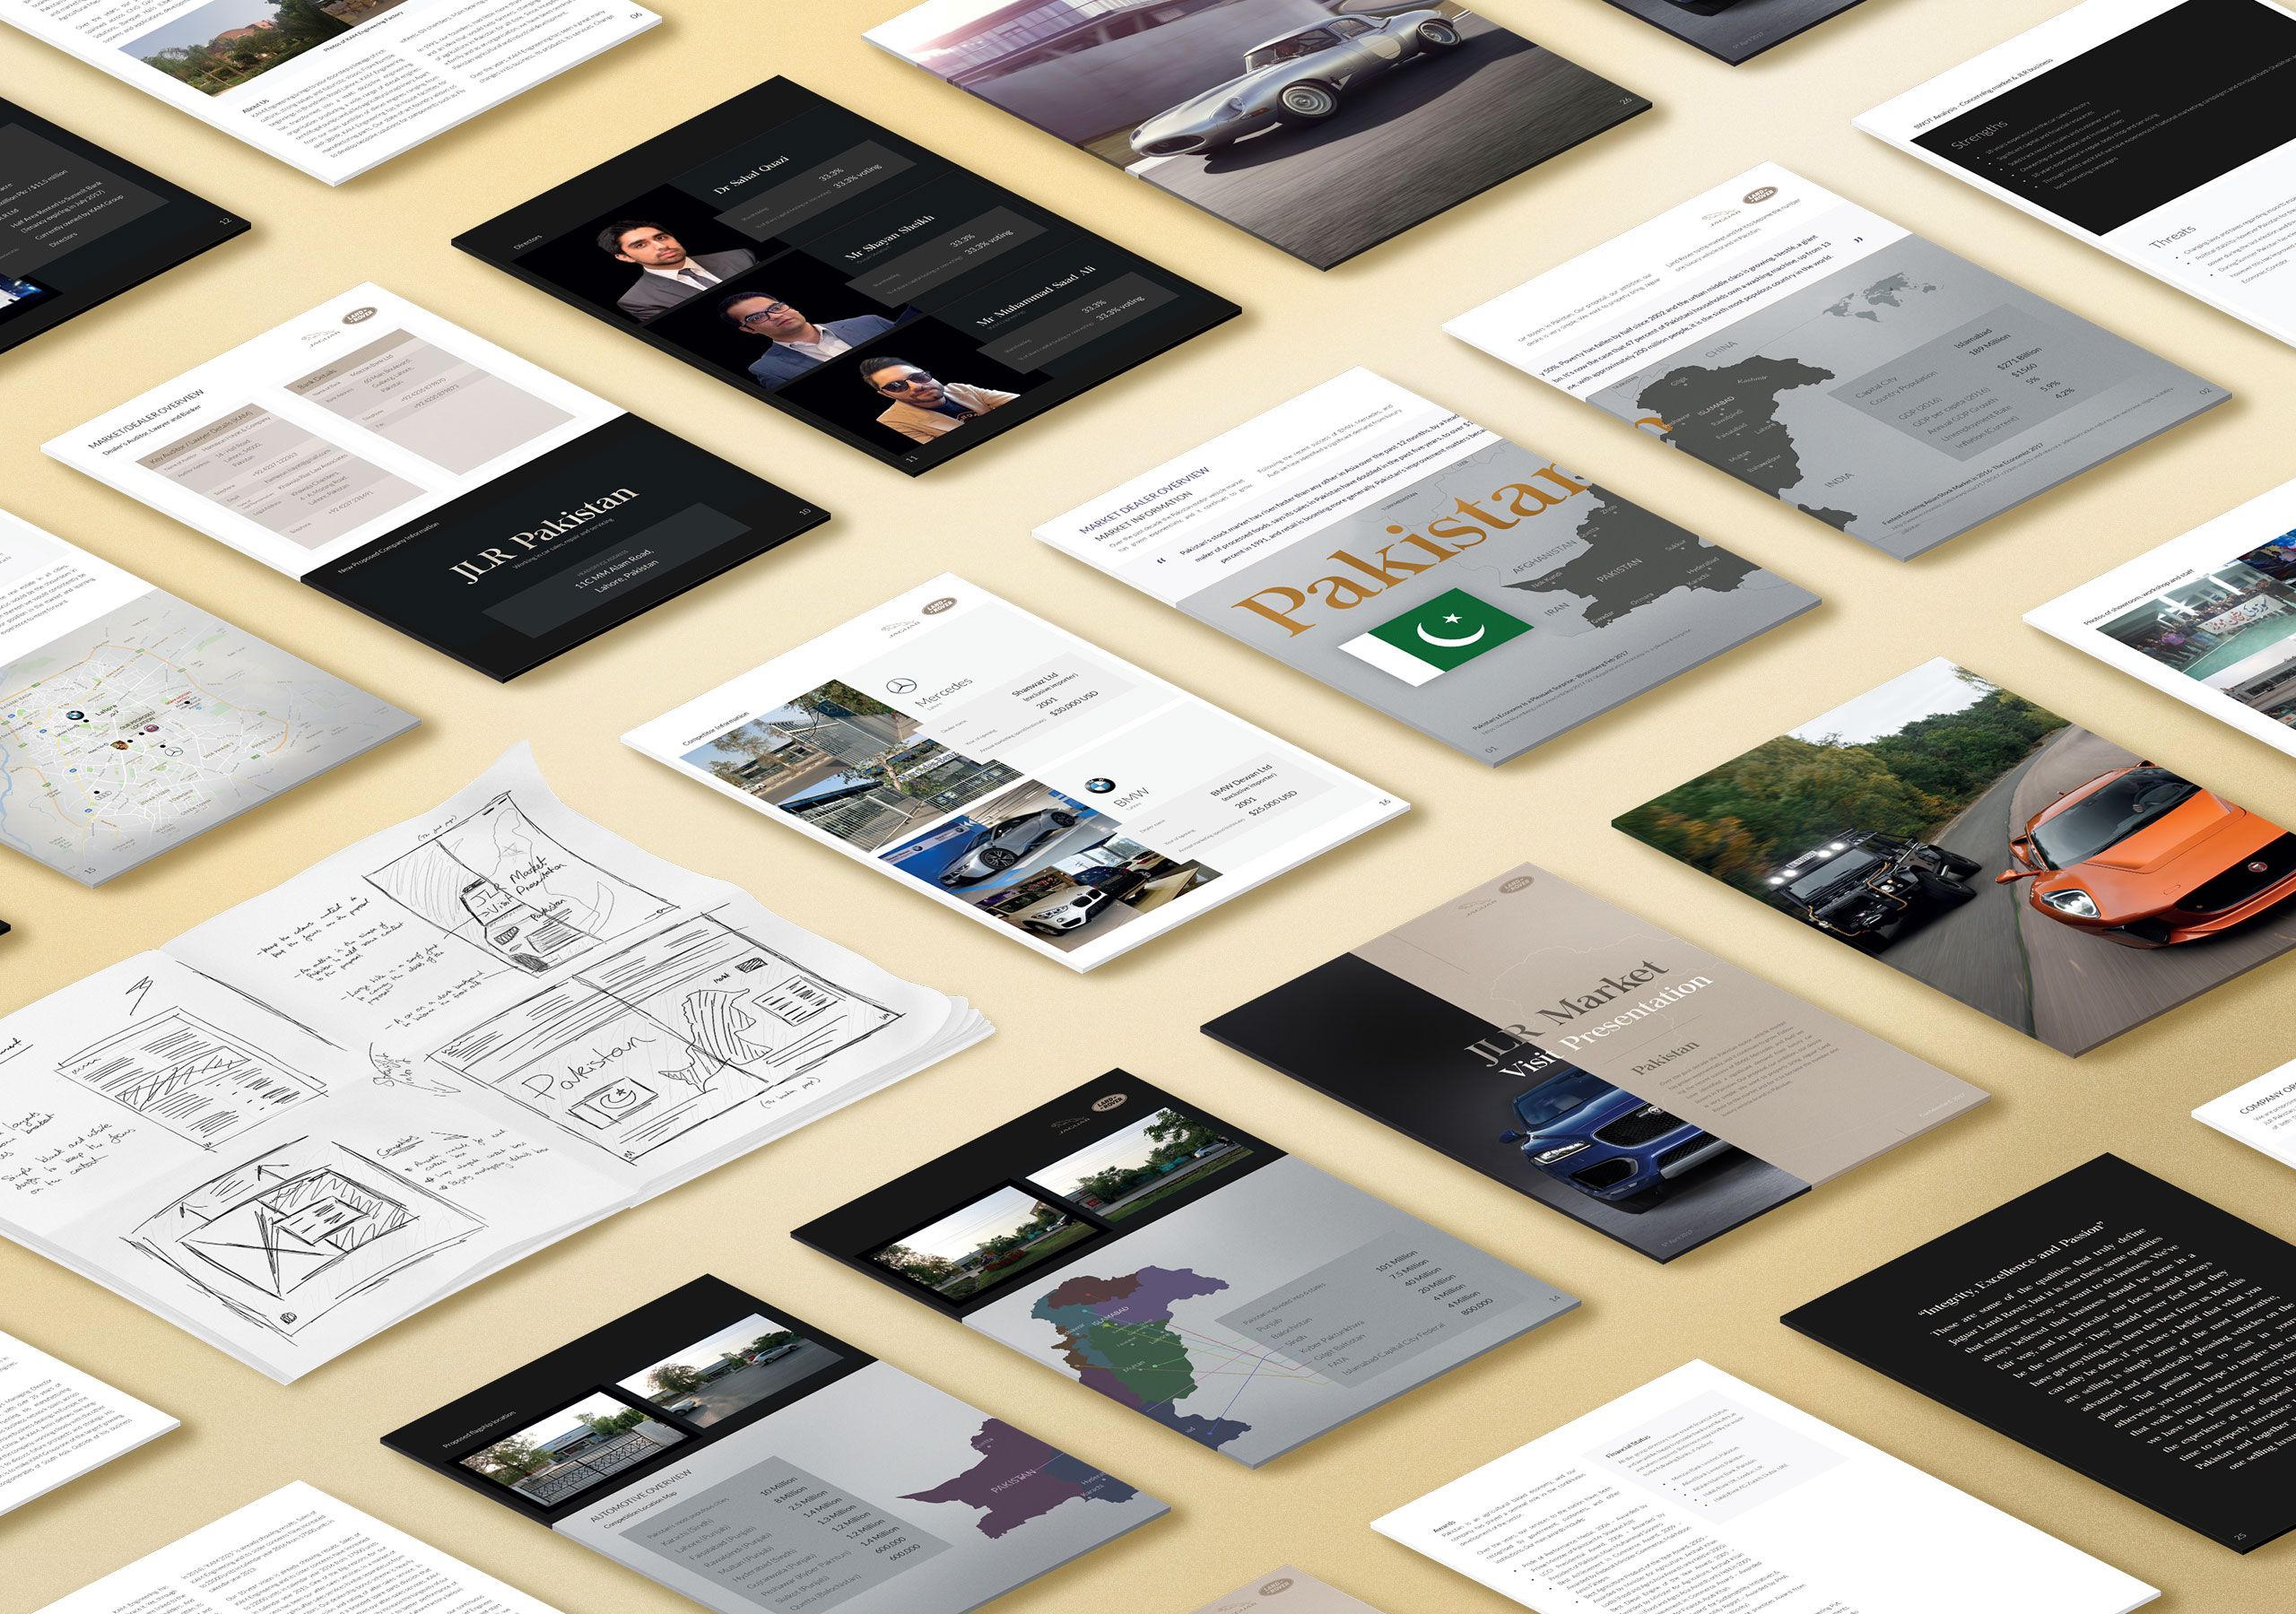 Our document design spreads and how they progressed from a few of our initial sketches